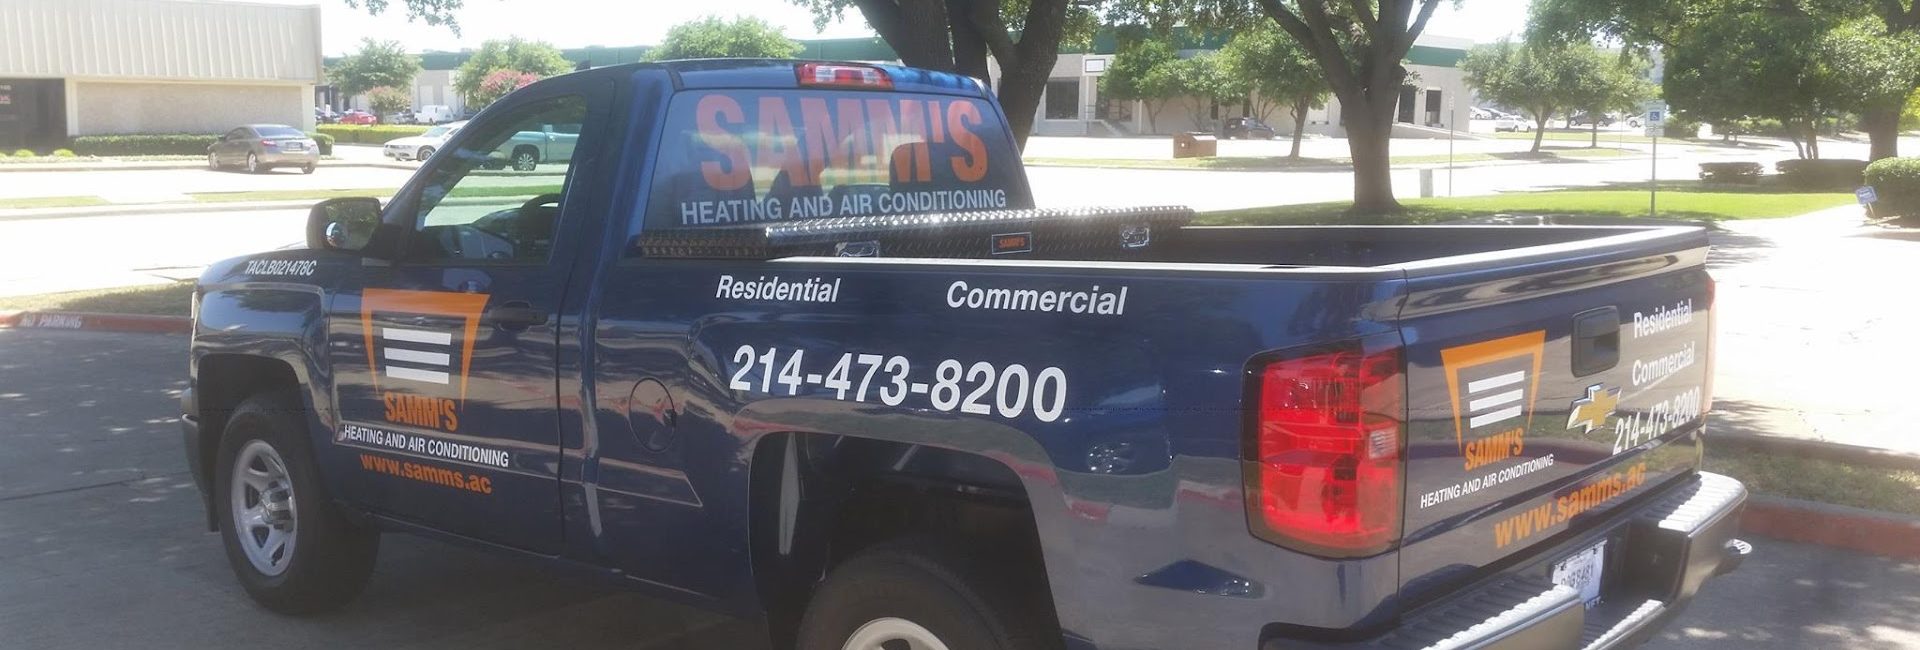 Samm’s Heating and Air Conditioning 6